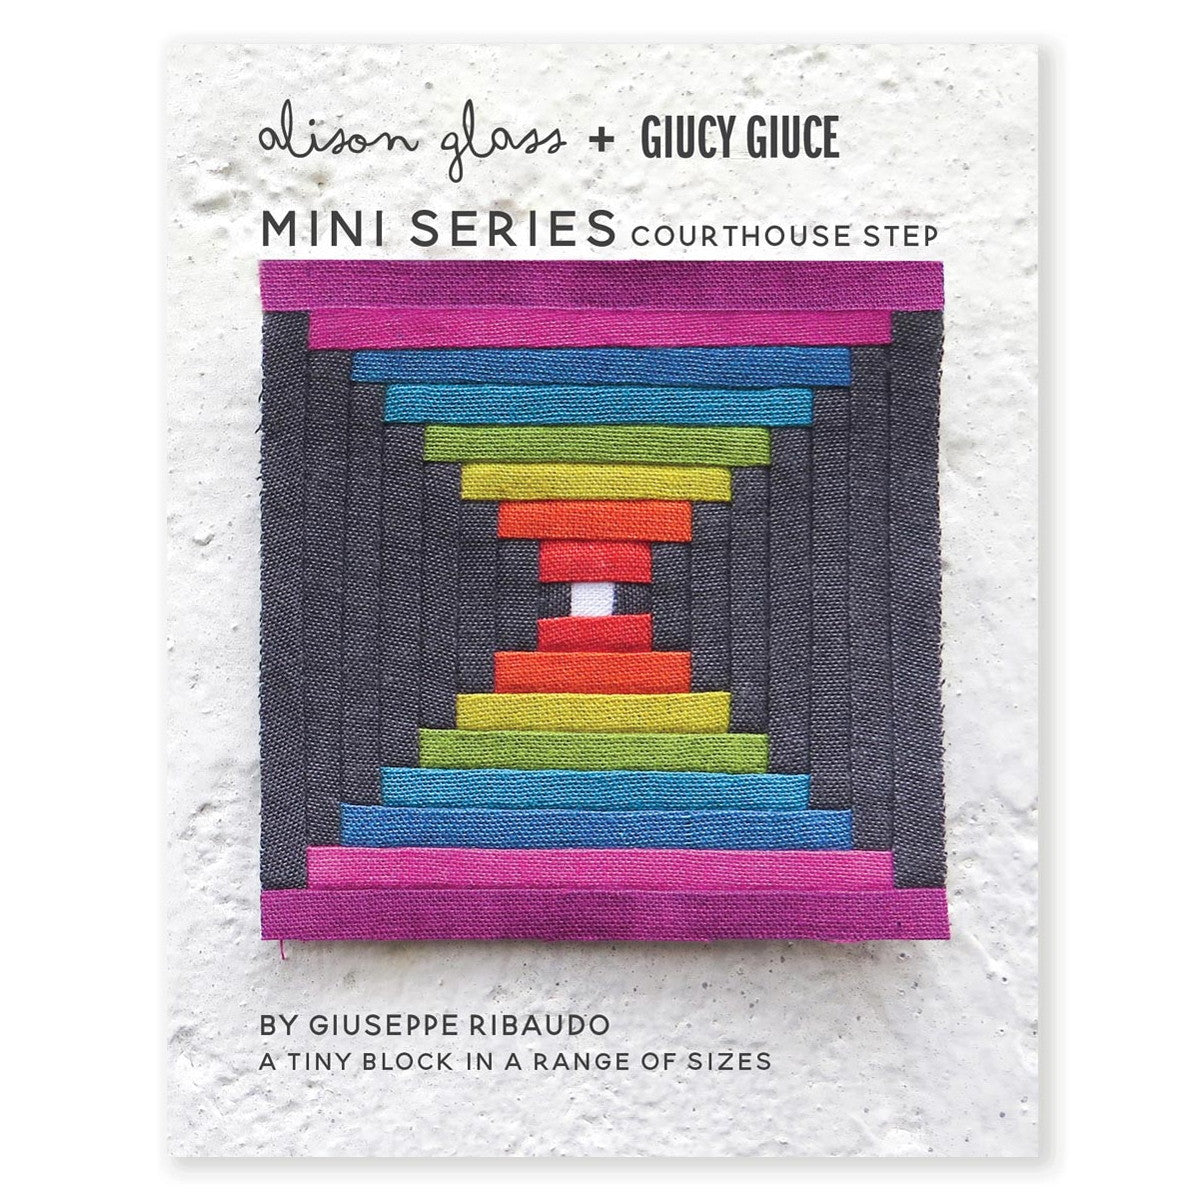 Mini Series Courthouse Step Pattern